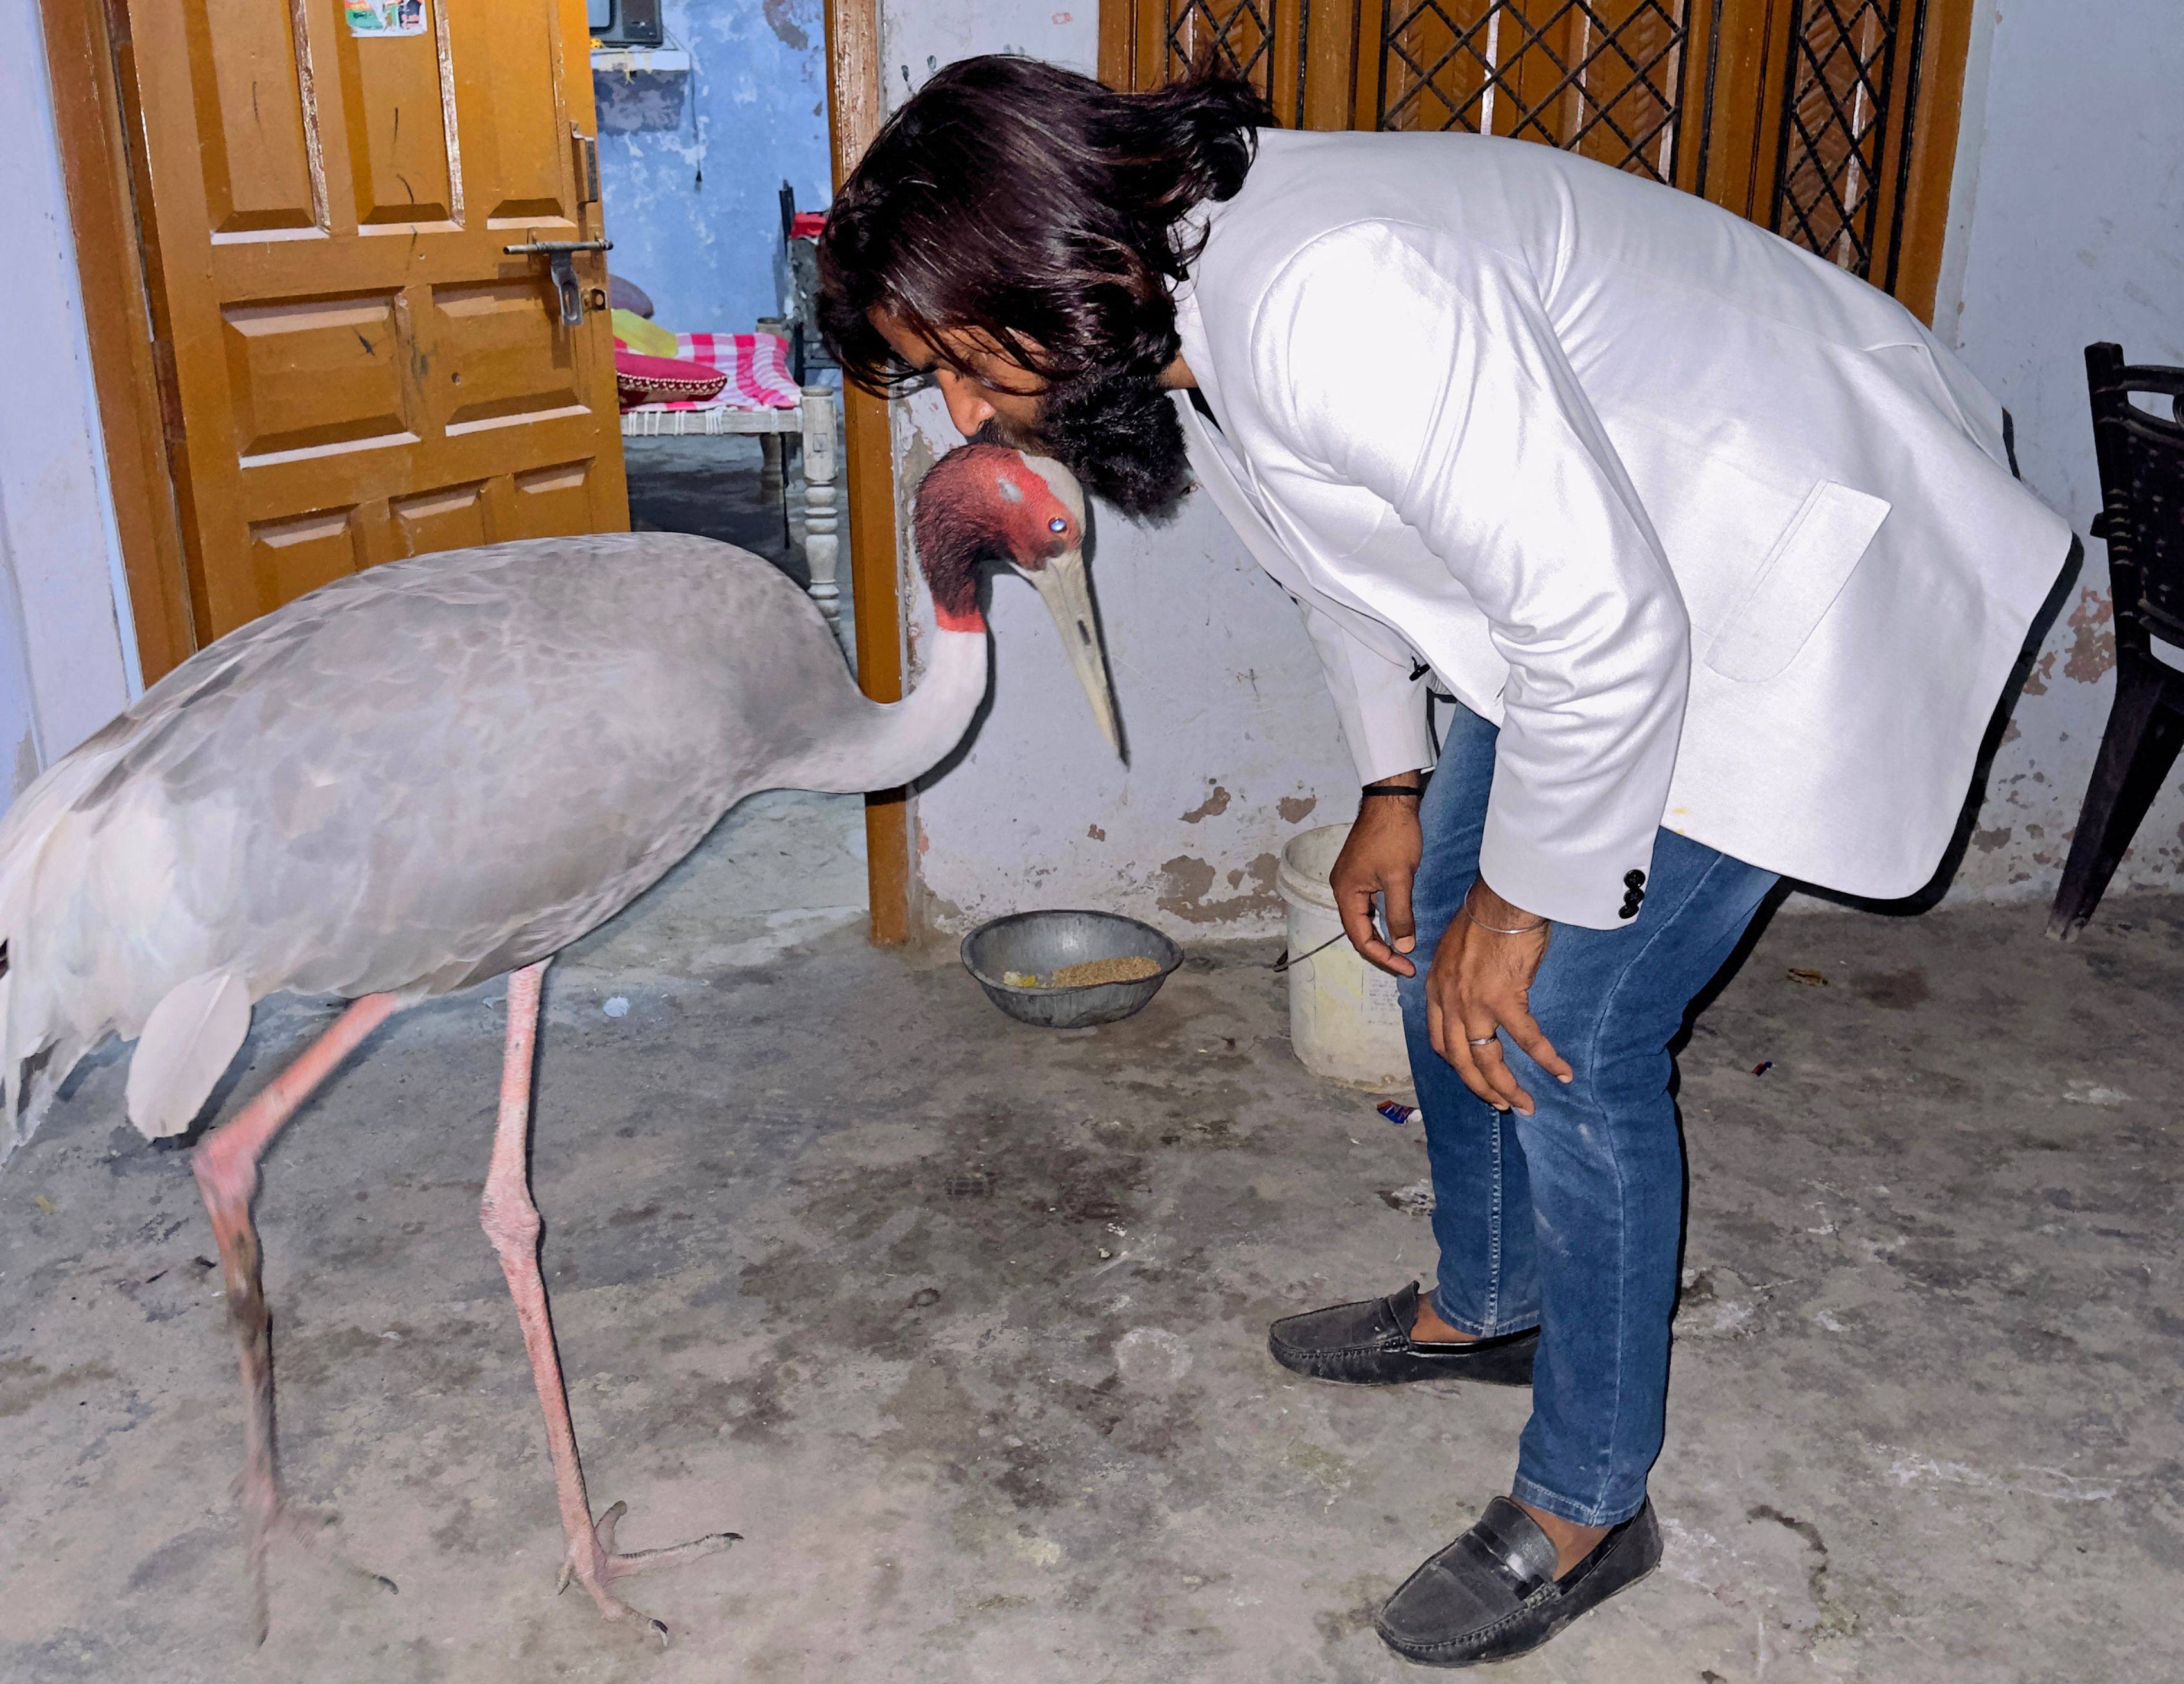 Mohammad Arif’s friendship with the  large bird has made him a social media star. Photo: AFP/Courtesy of Mohammad Arif